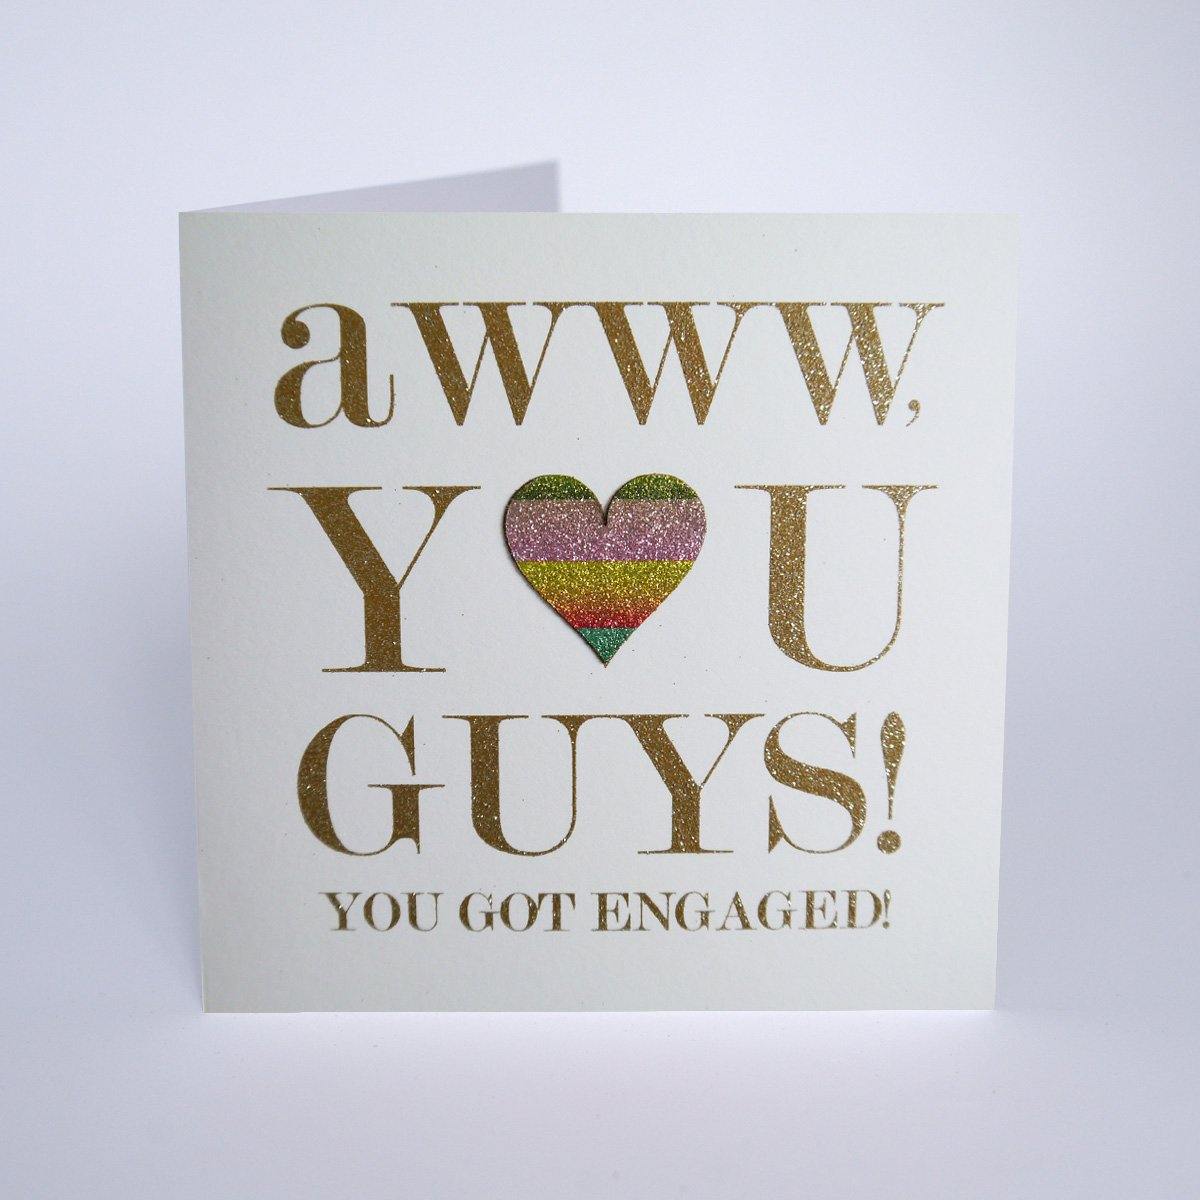 Aww You Guys! You Got Engaged! - Engagement Card - TwoBeeps.co.uk